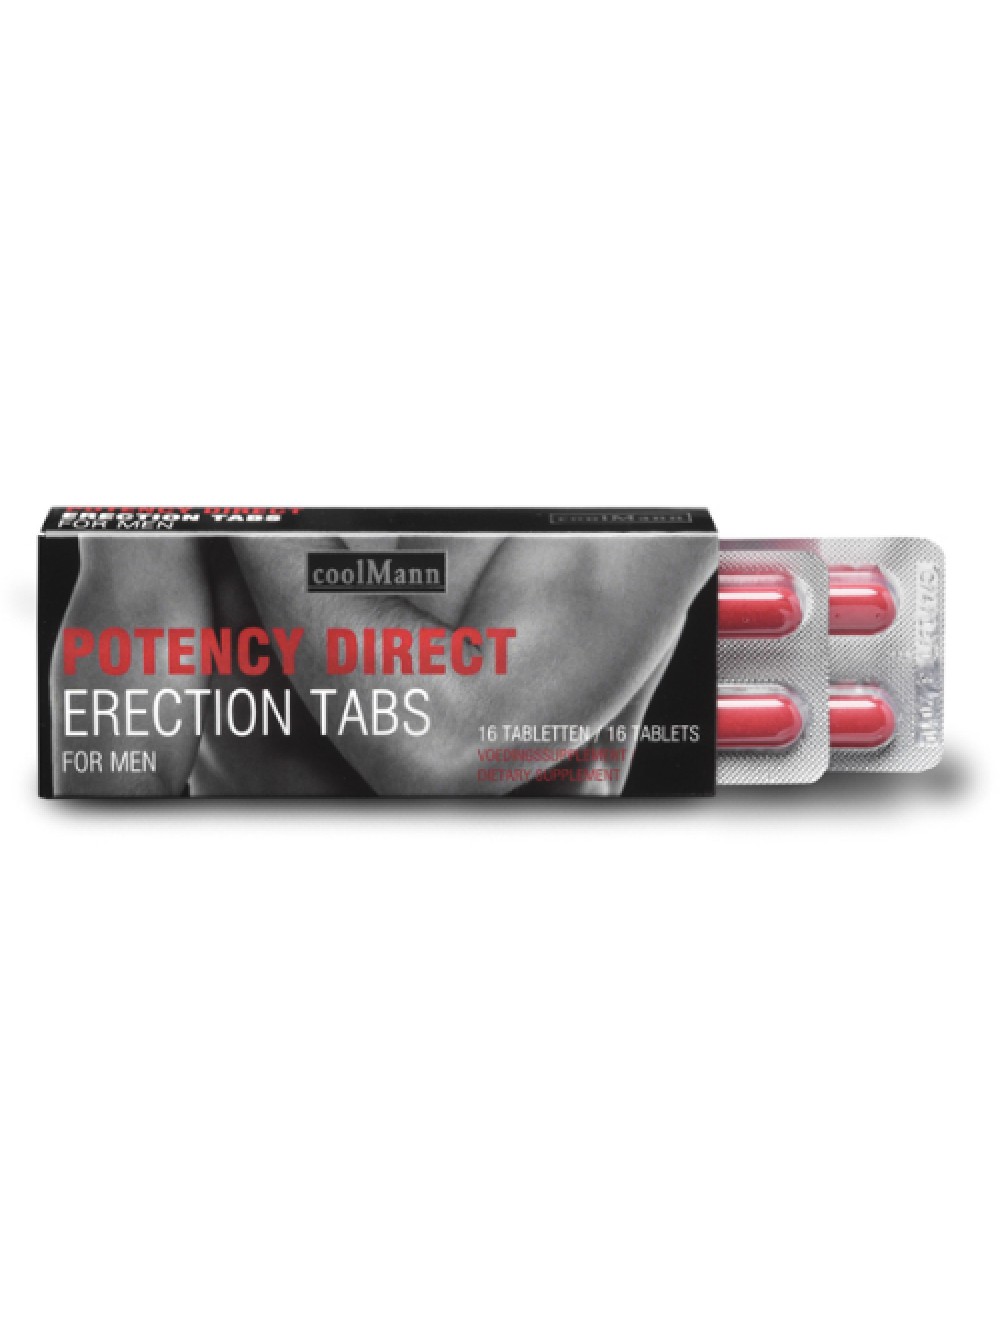 Potency Direct Erection Tabs 8717344179898